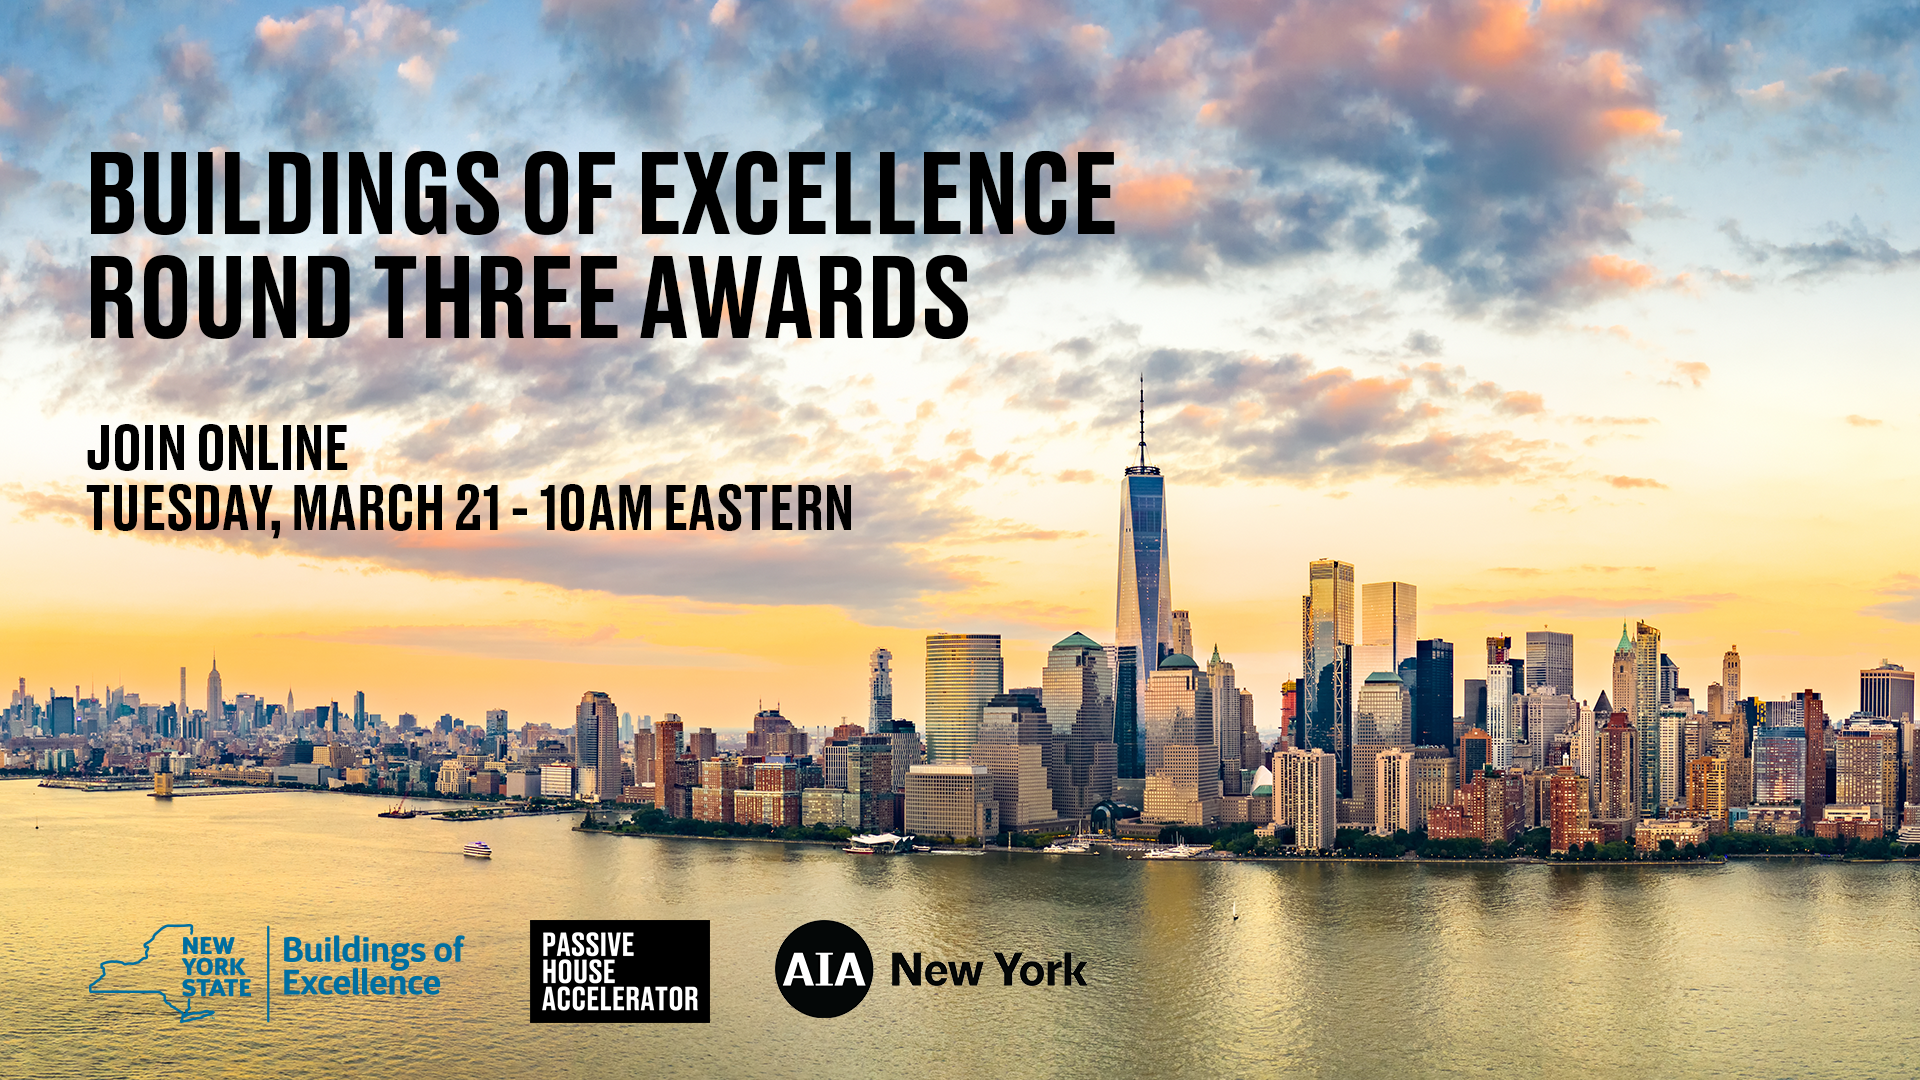 Buildings of Excellence Awards Ceremony This Tuesday (March 21)